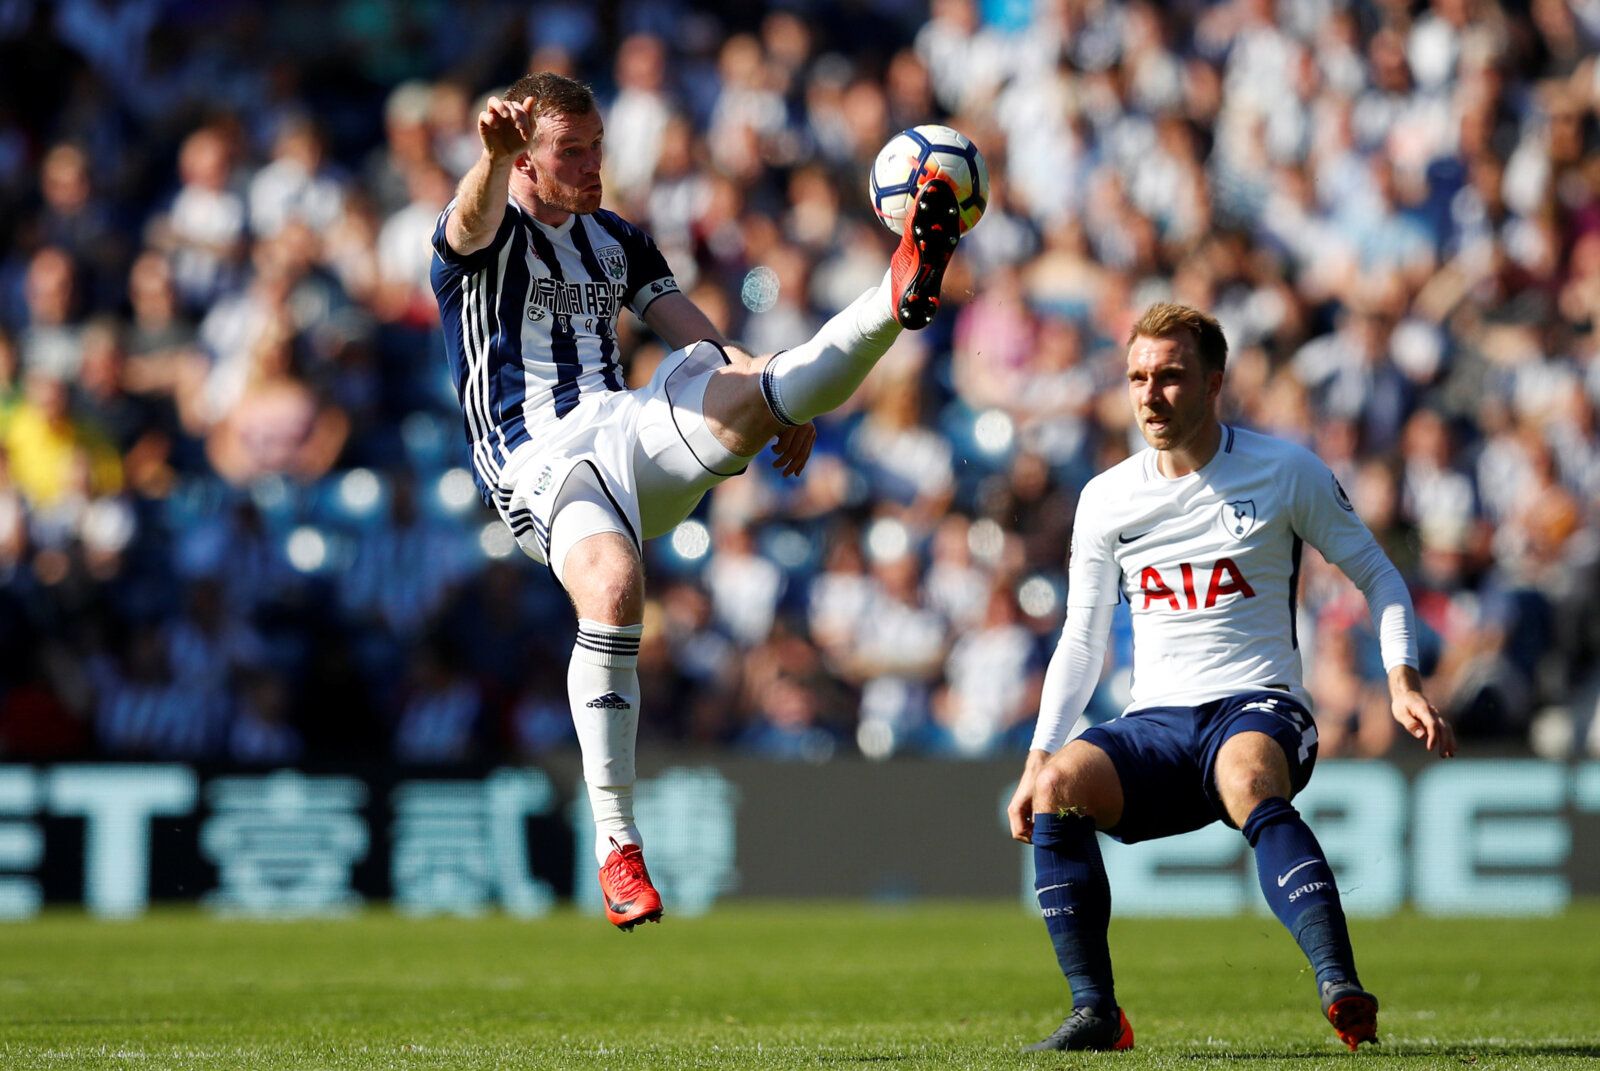 Soccer Football - Premier League - West Bromwich Albion vs Tottenham Hotspur - The Hawthorns, West Bromwich, Britain - May 5, 2018   West Bromwich Albion's Chris Brunt in action with Tottenham's Christian Eriksen            REUTERS/Phil Noble    EDITORIAL USE ONLY. No use with unauthorized audio, video, data, fixture lists, club/league logos or 